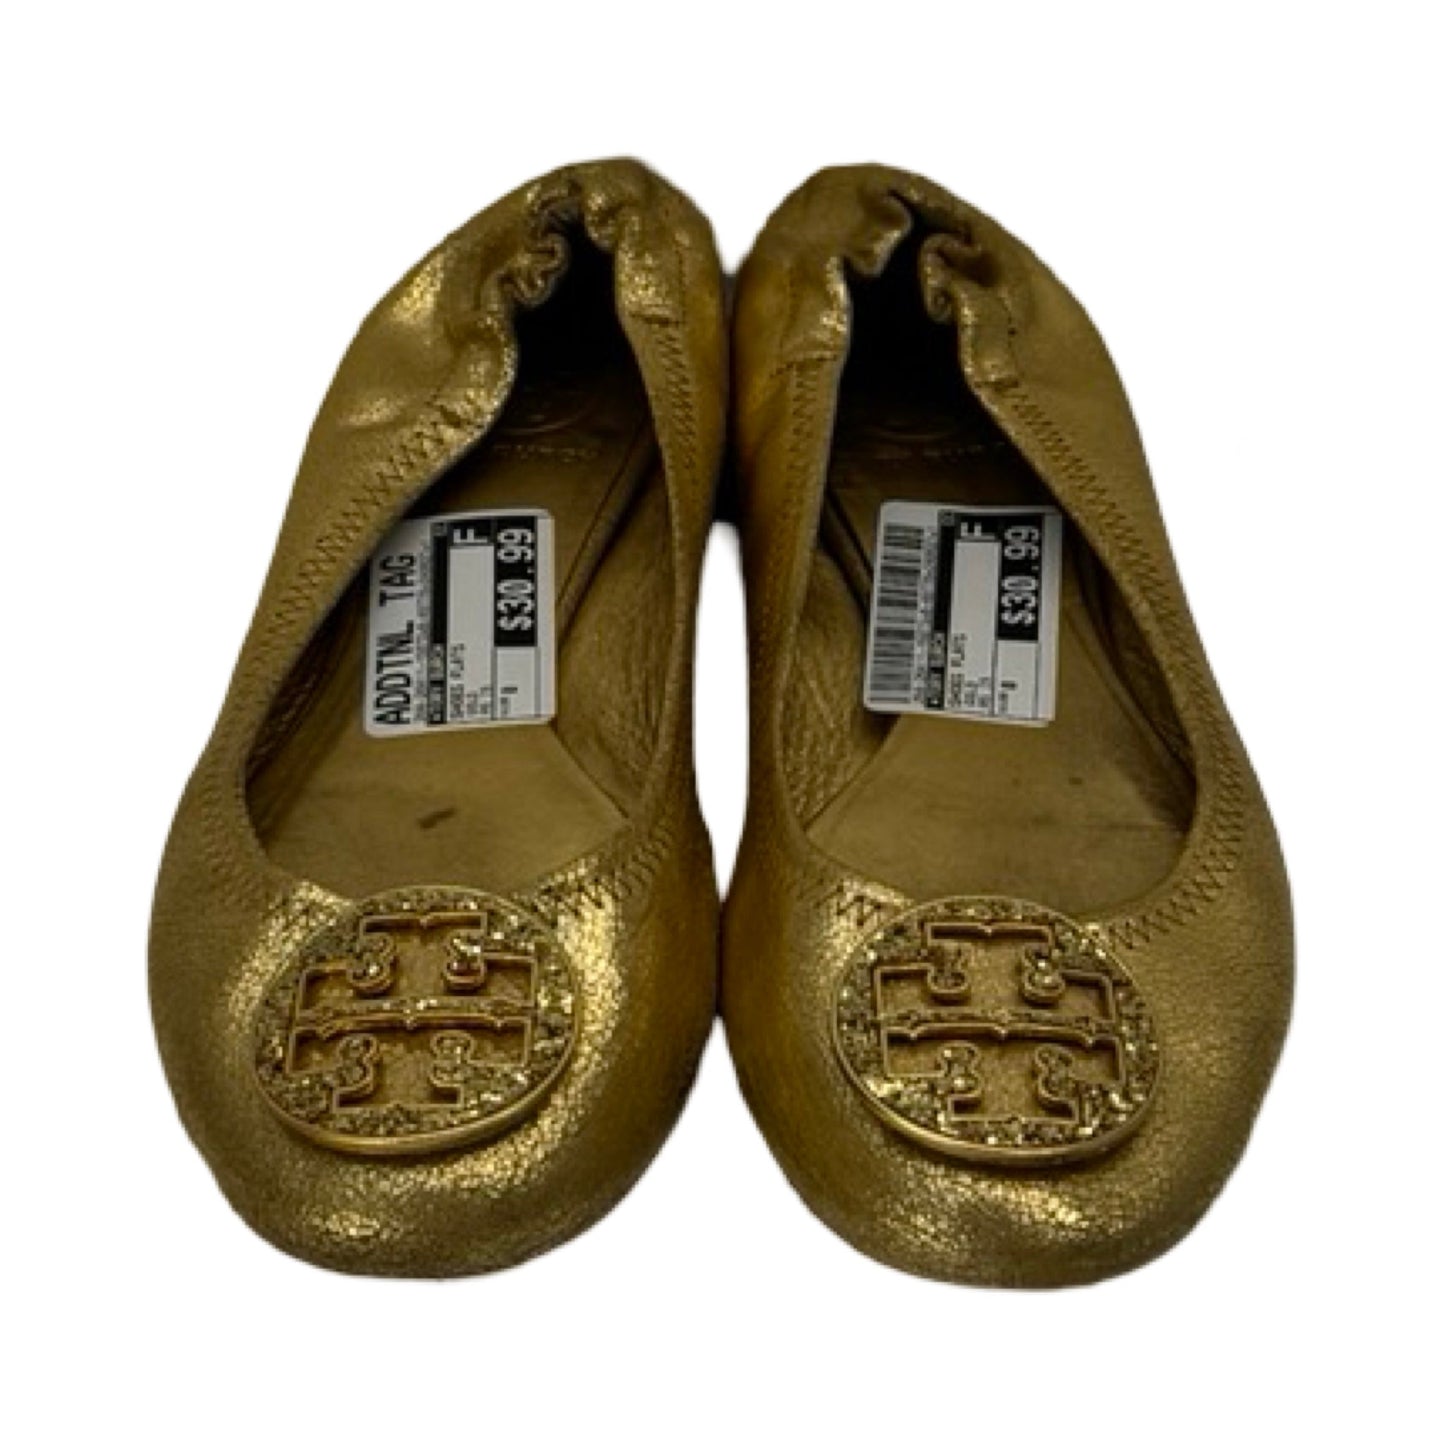 Gold Shoes Flats Tory Burch, Size 8